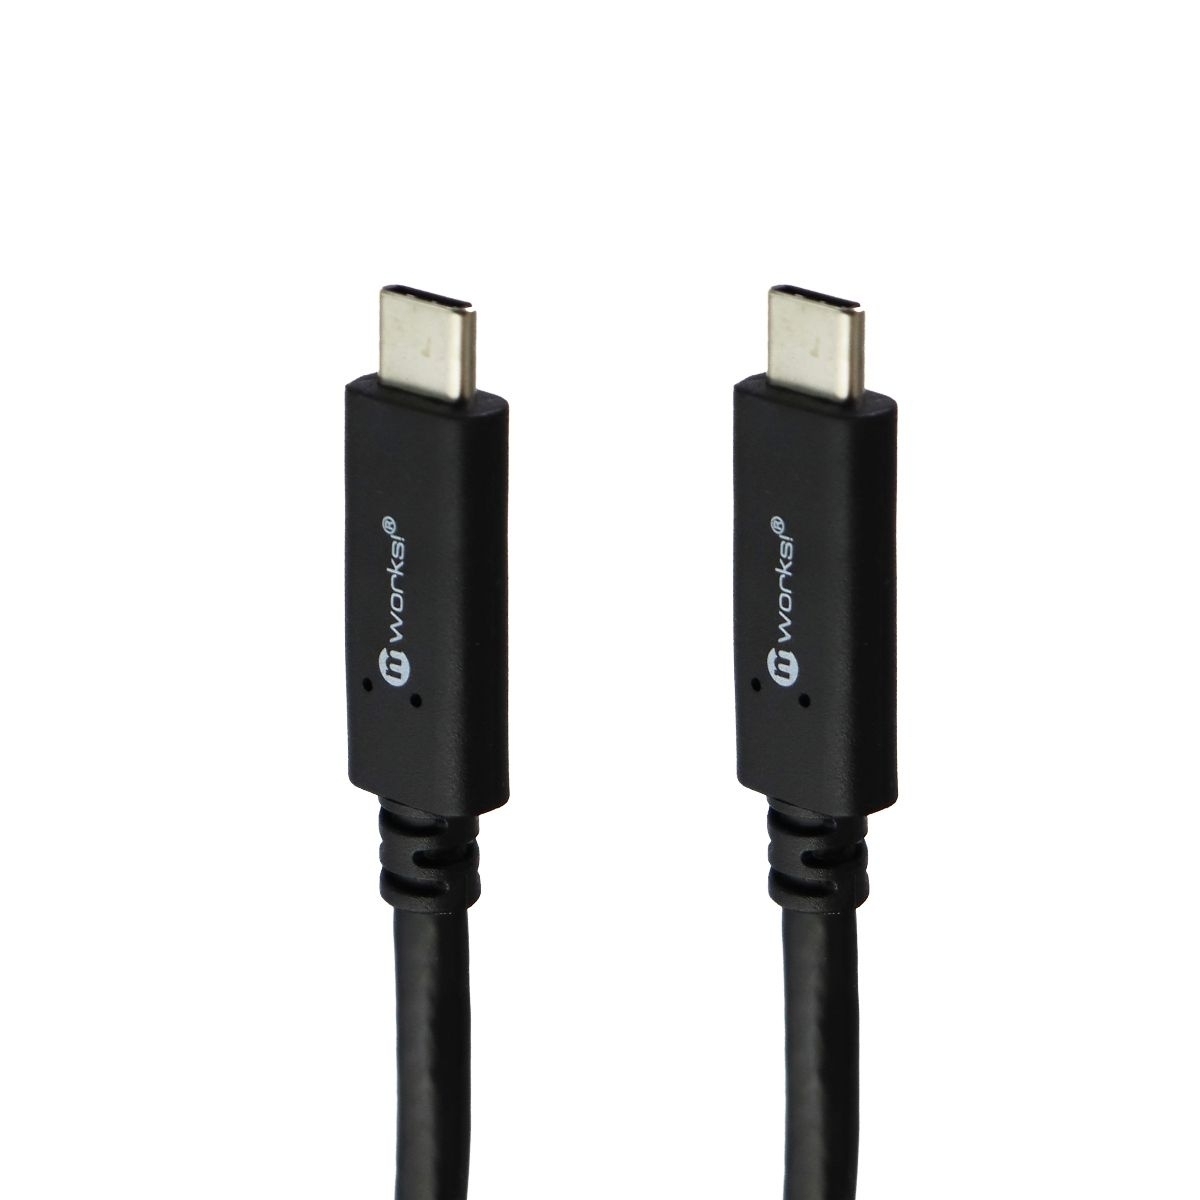 Mworks! MPOWER! 6 Ft. Round USB-C To USB-C Cable - Black